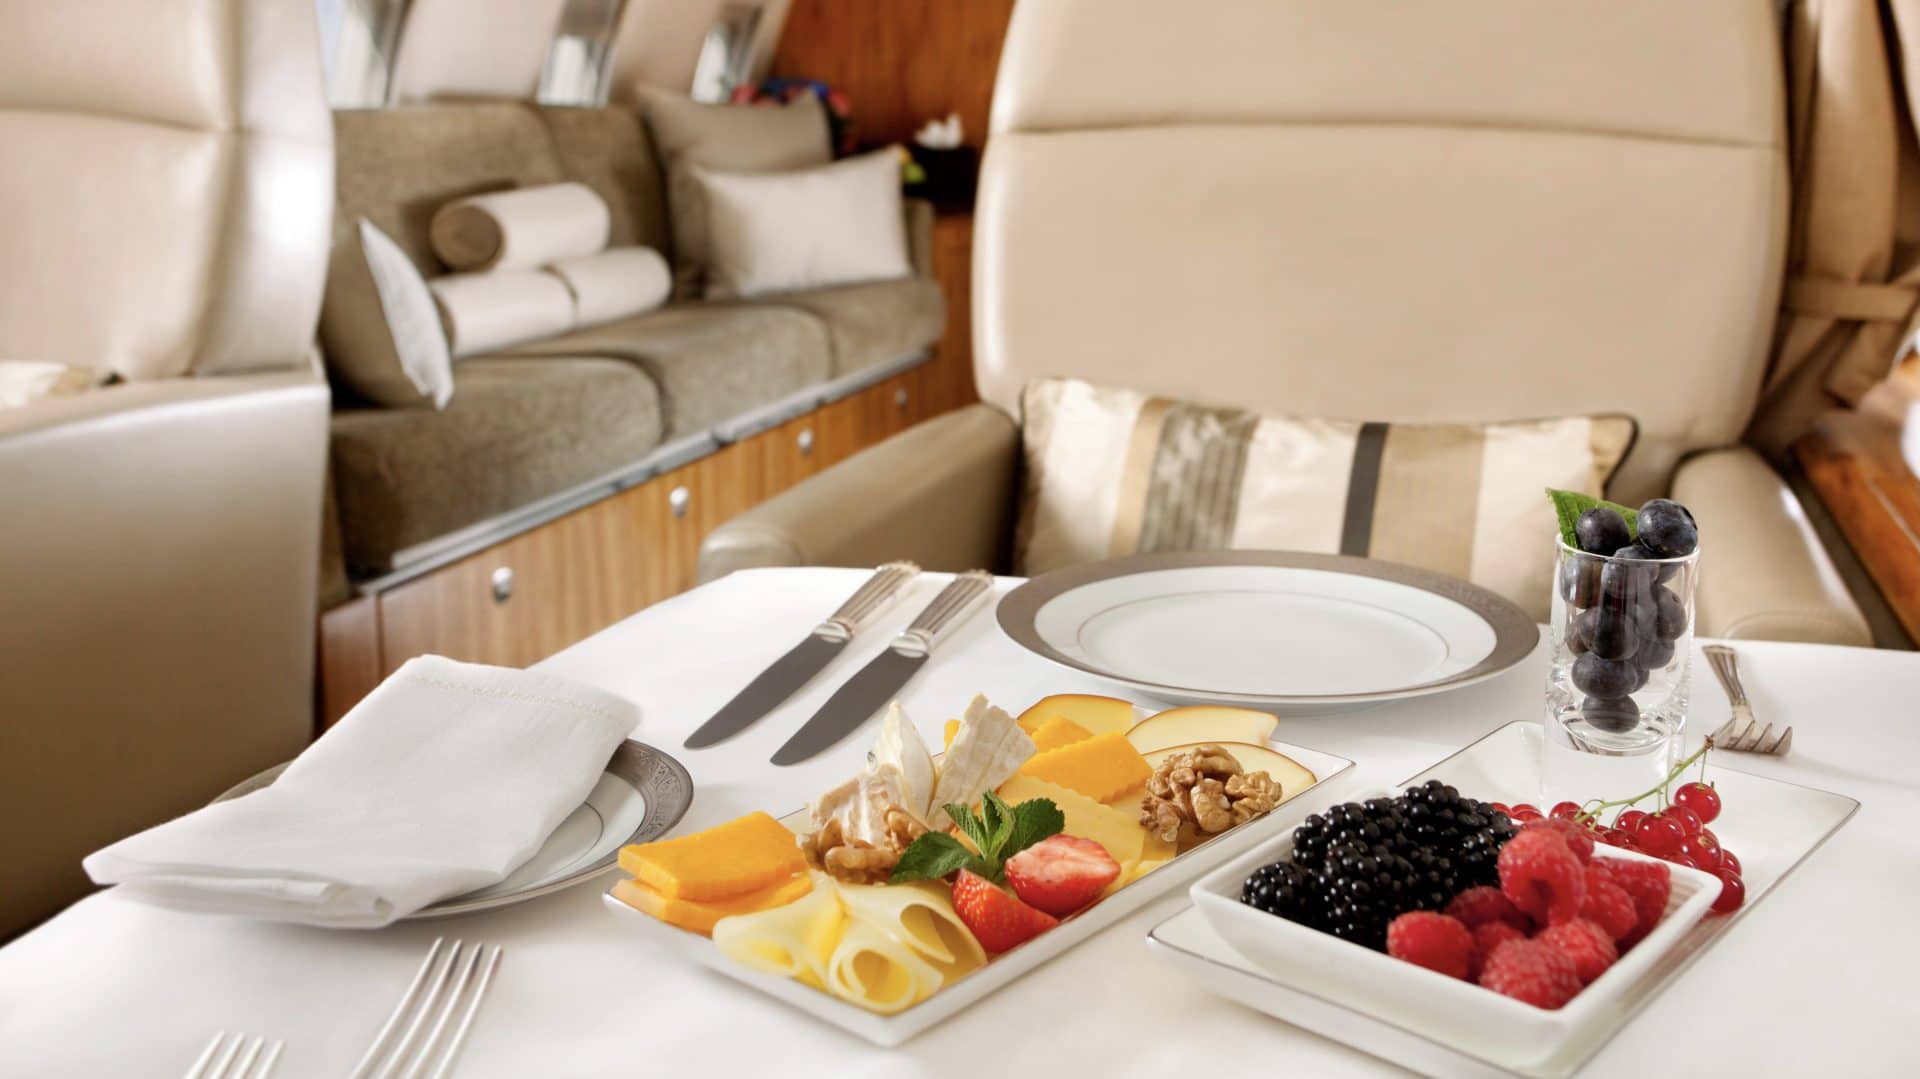 Food Served On Board Of Business Class Airplane.